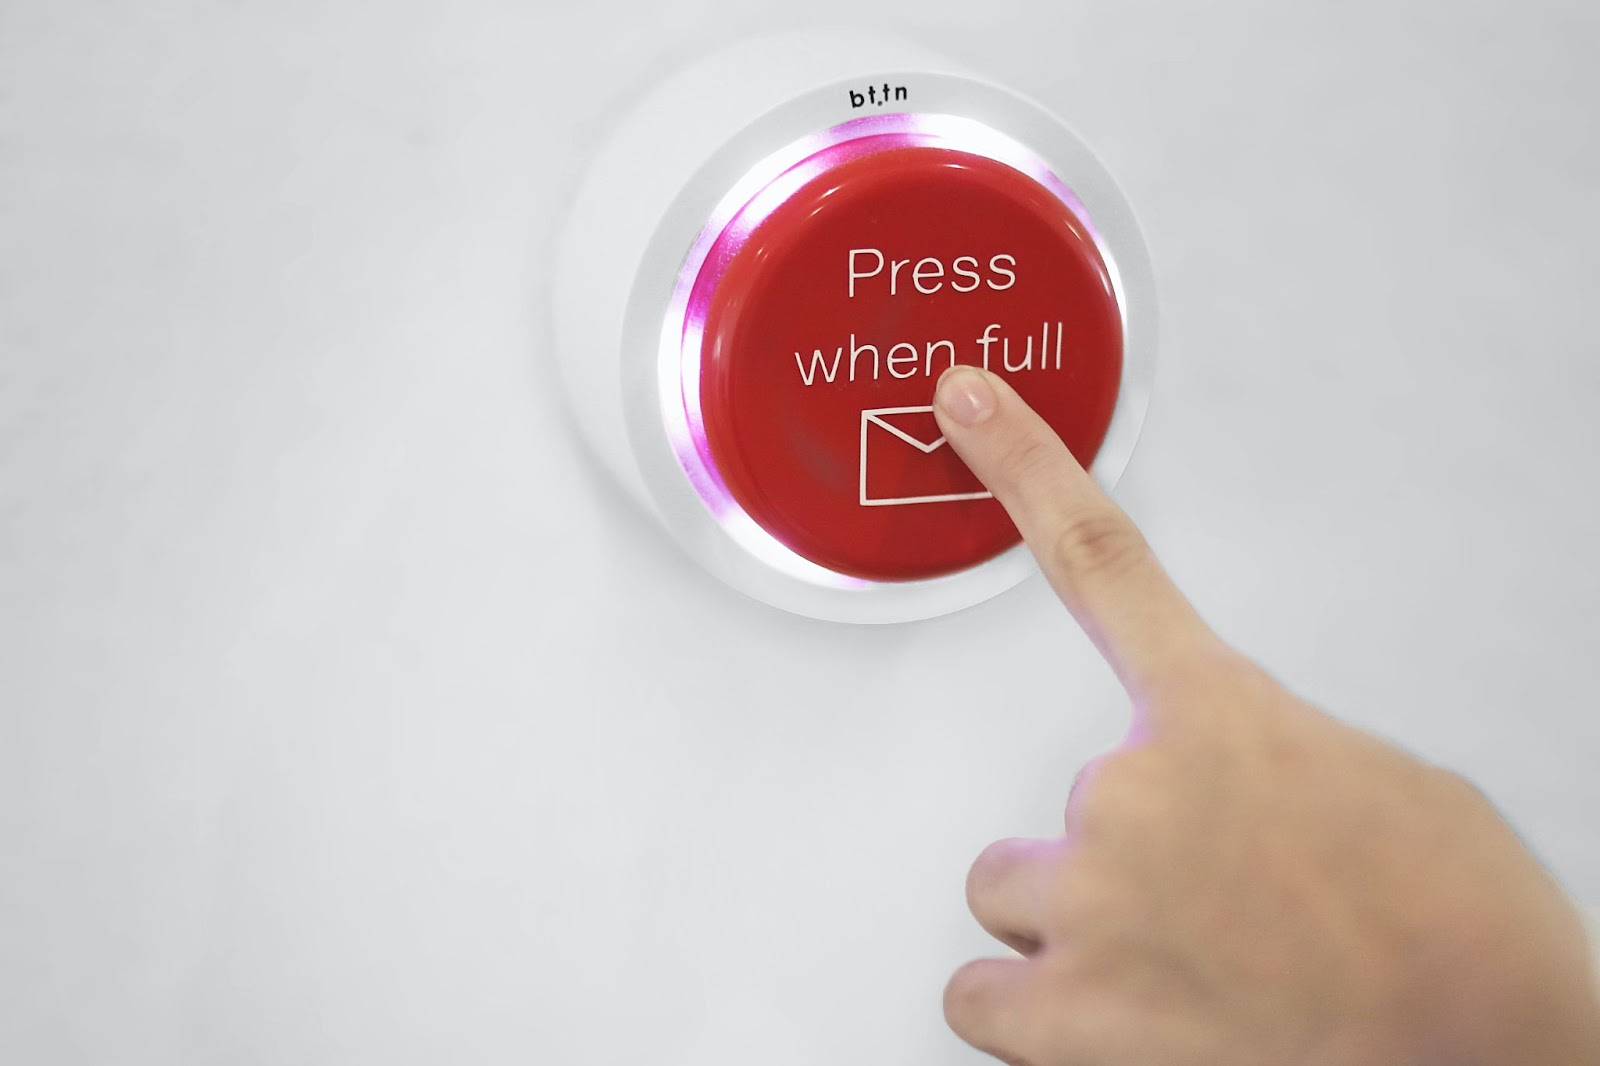 A person pushing a red button that says “Press when full” and includes an email icon.